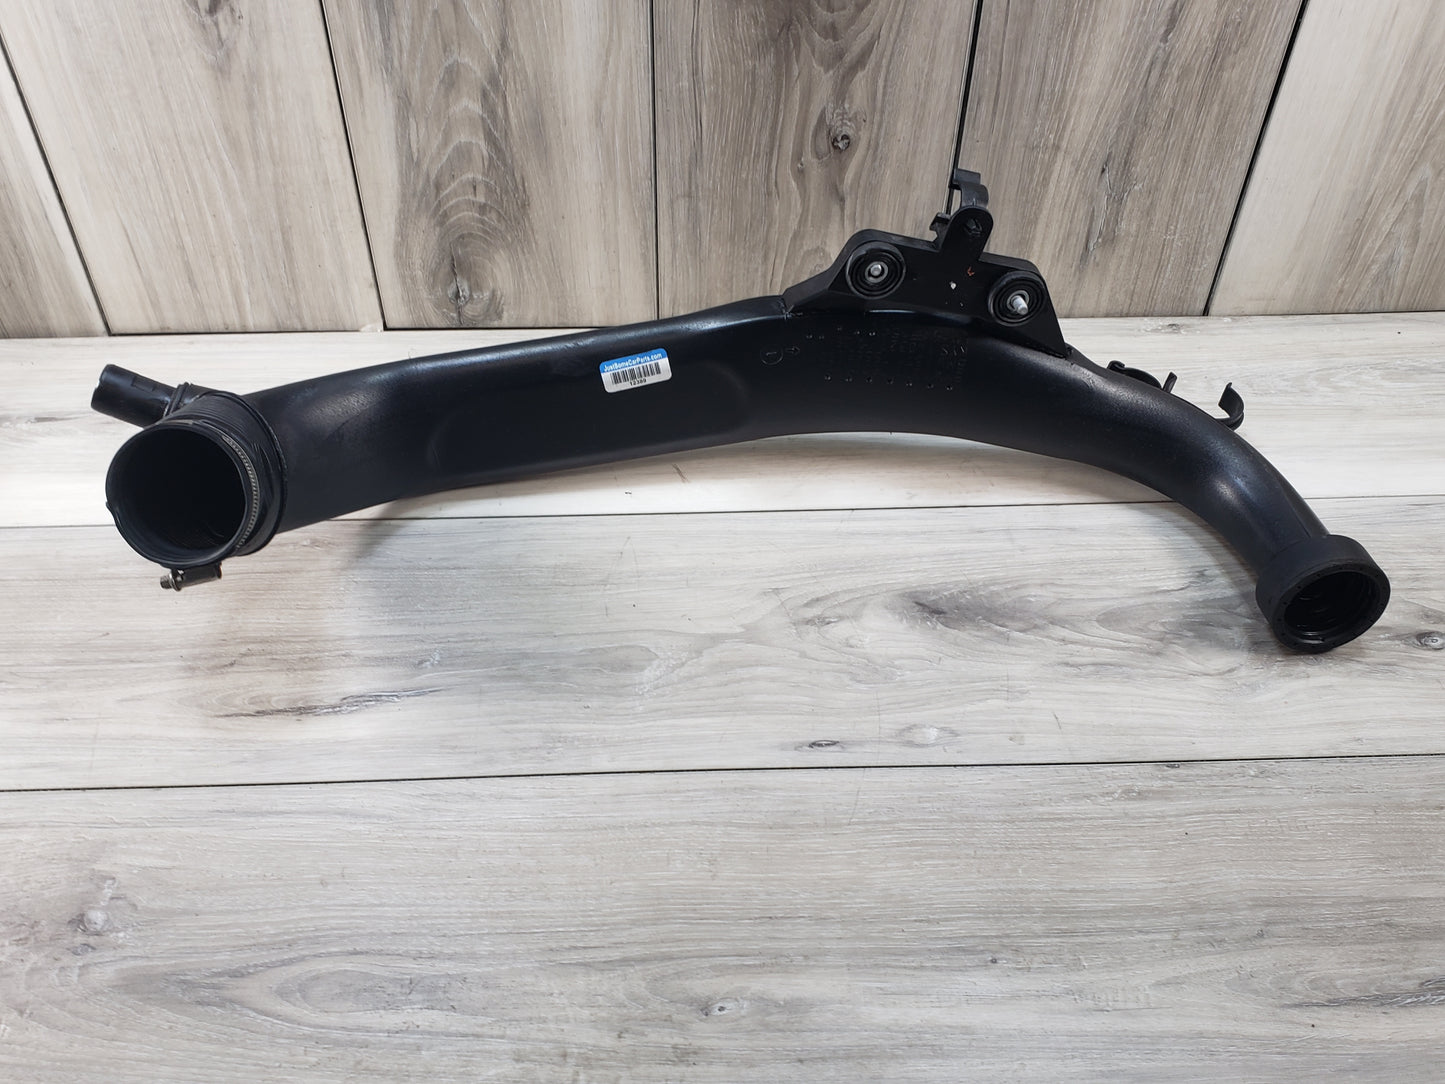 BMW 07-10 E93 335i Front Air Intake Duct Tube Pipe Pre LCI